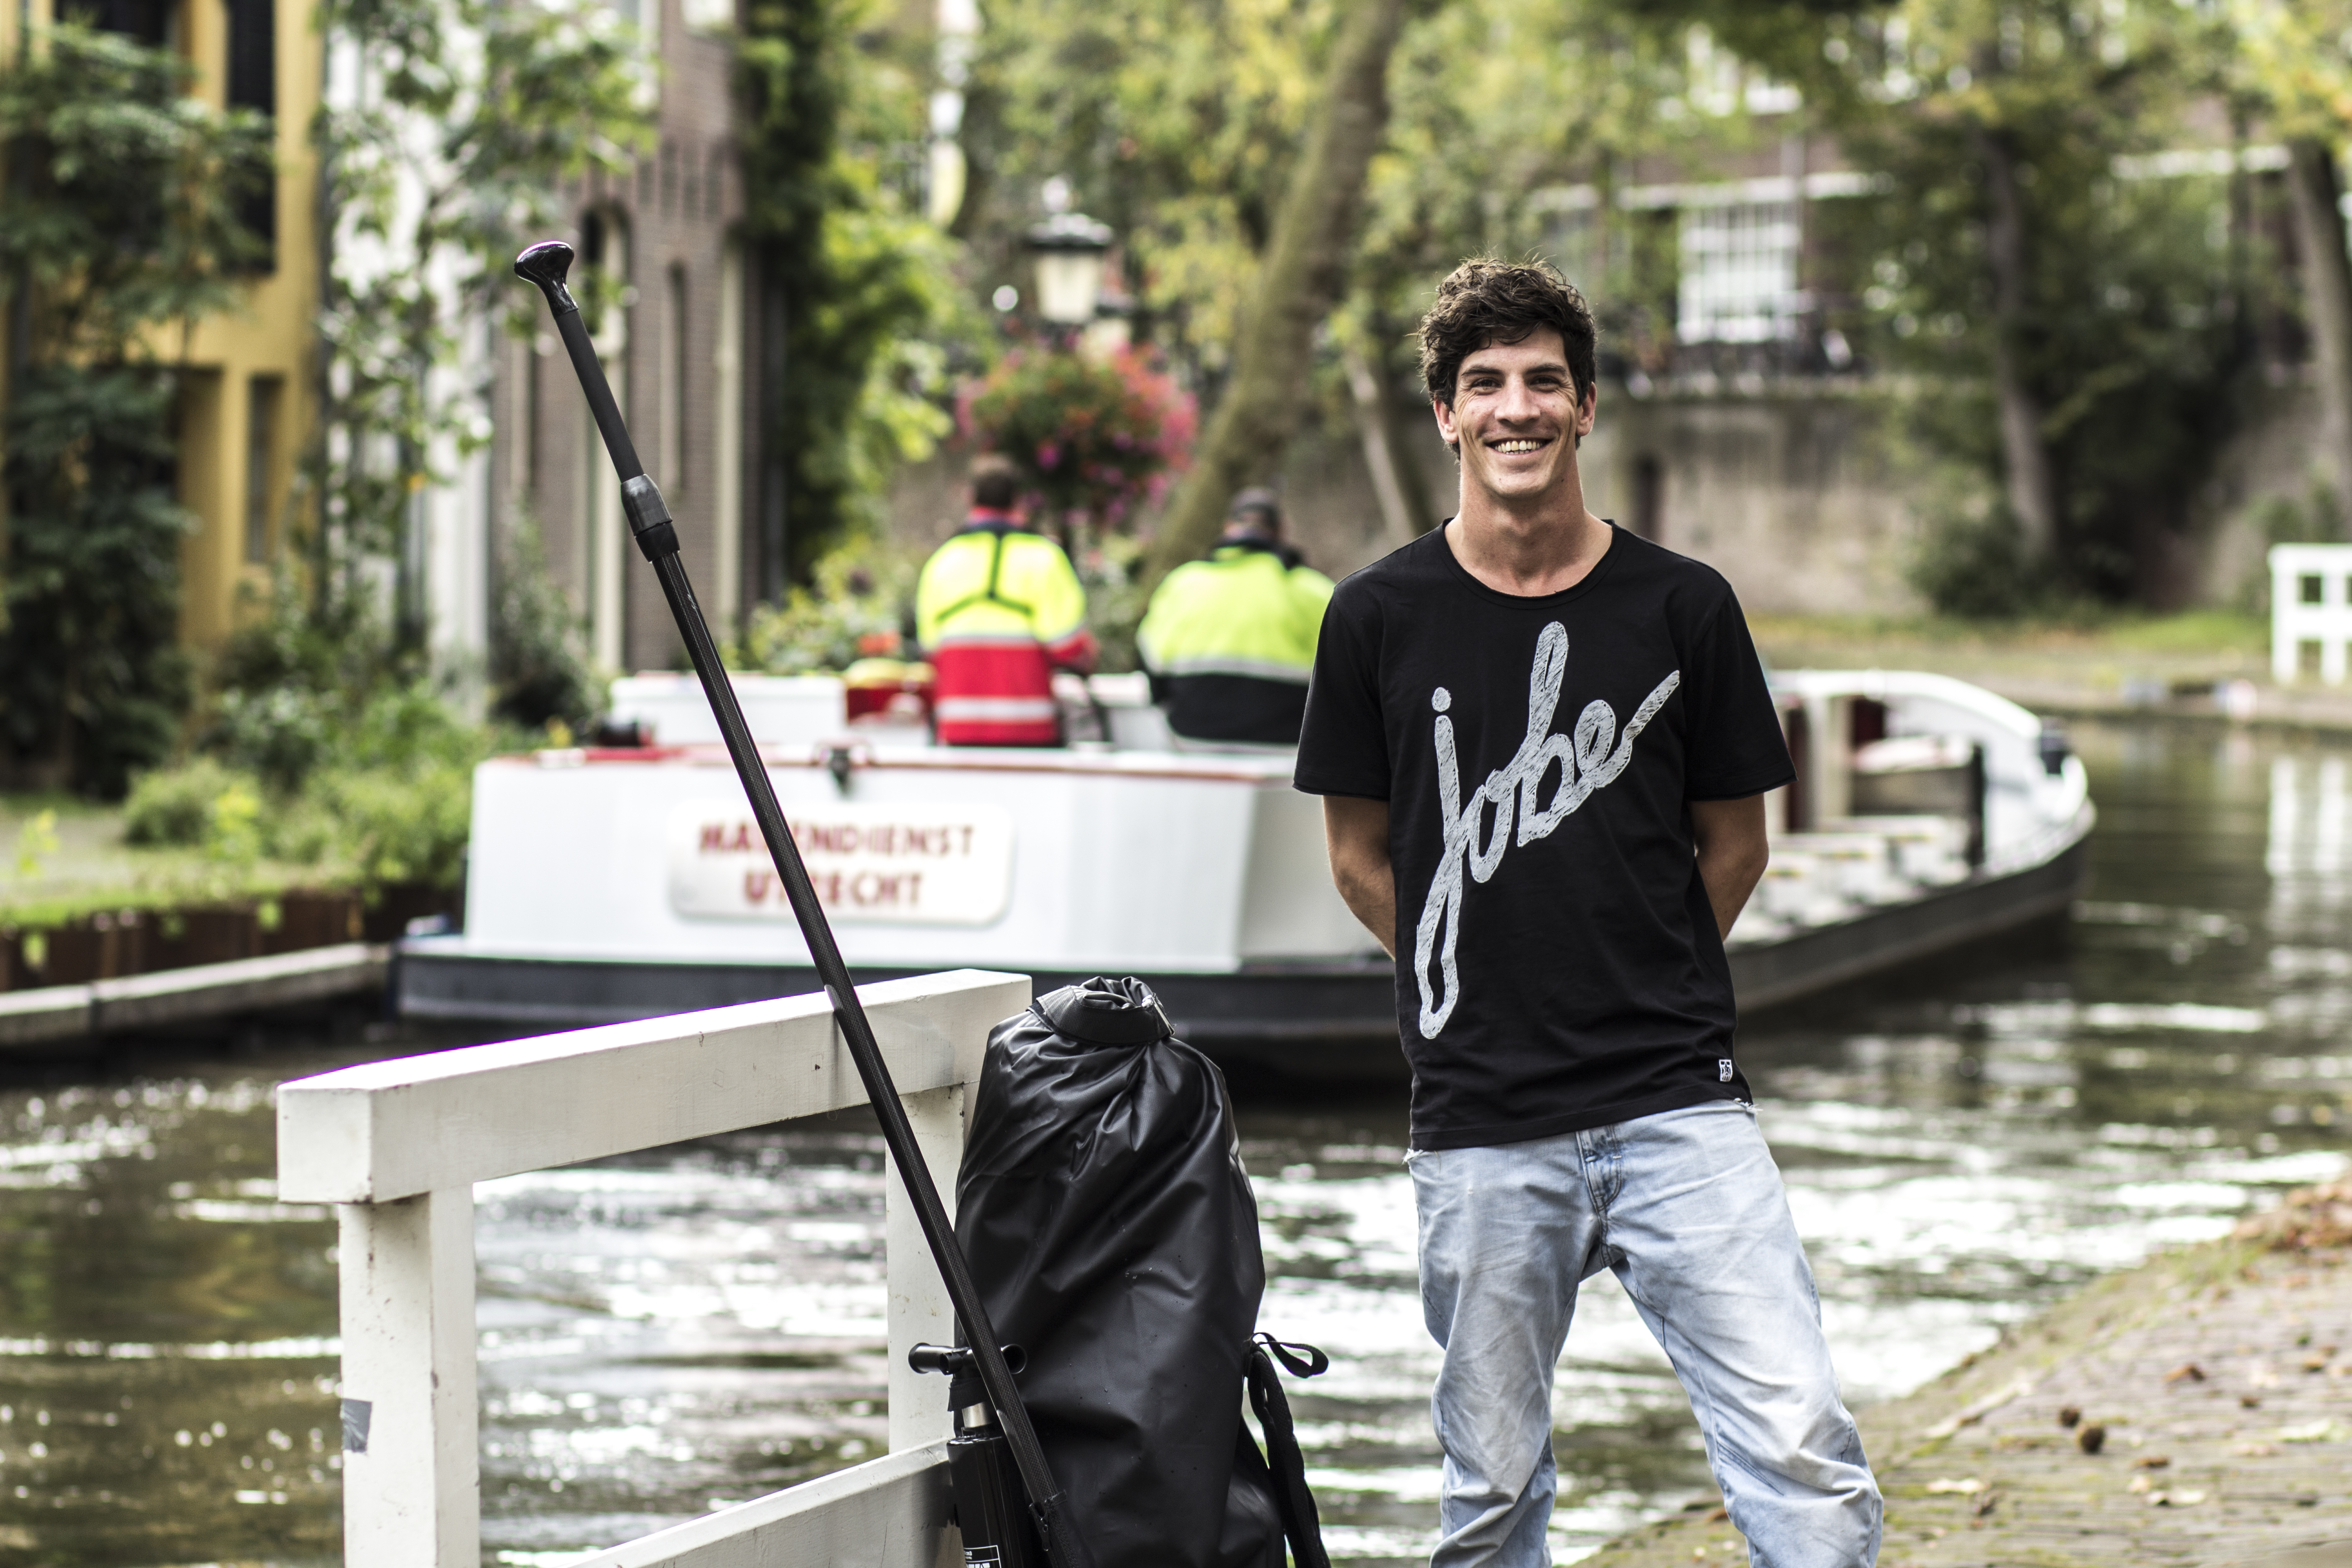 Meet your personal SUP instructor: Christian Marsman